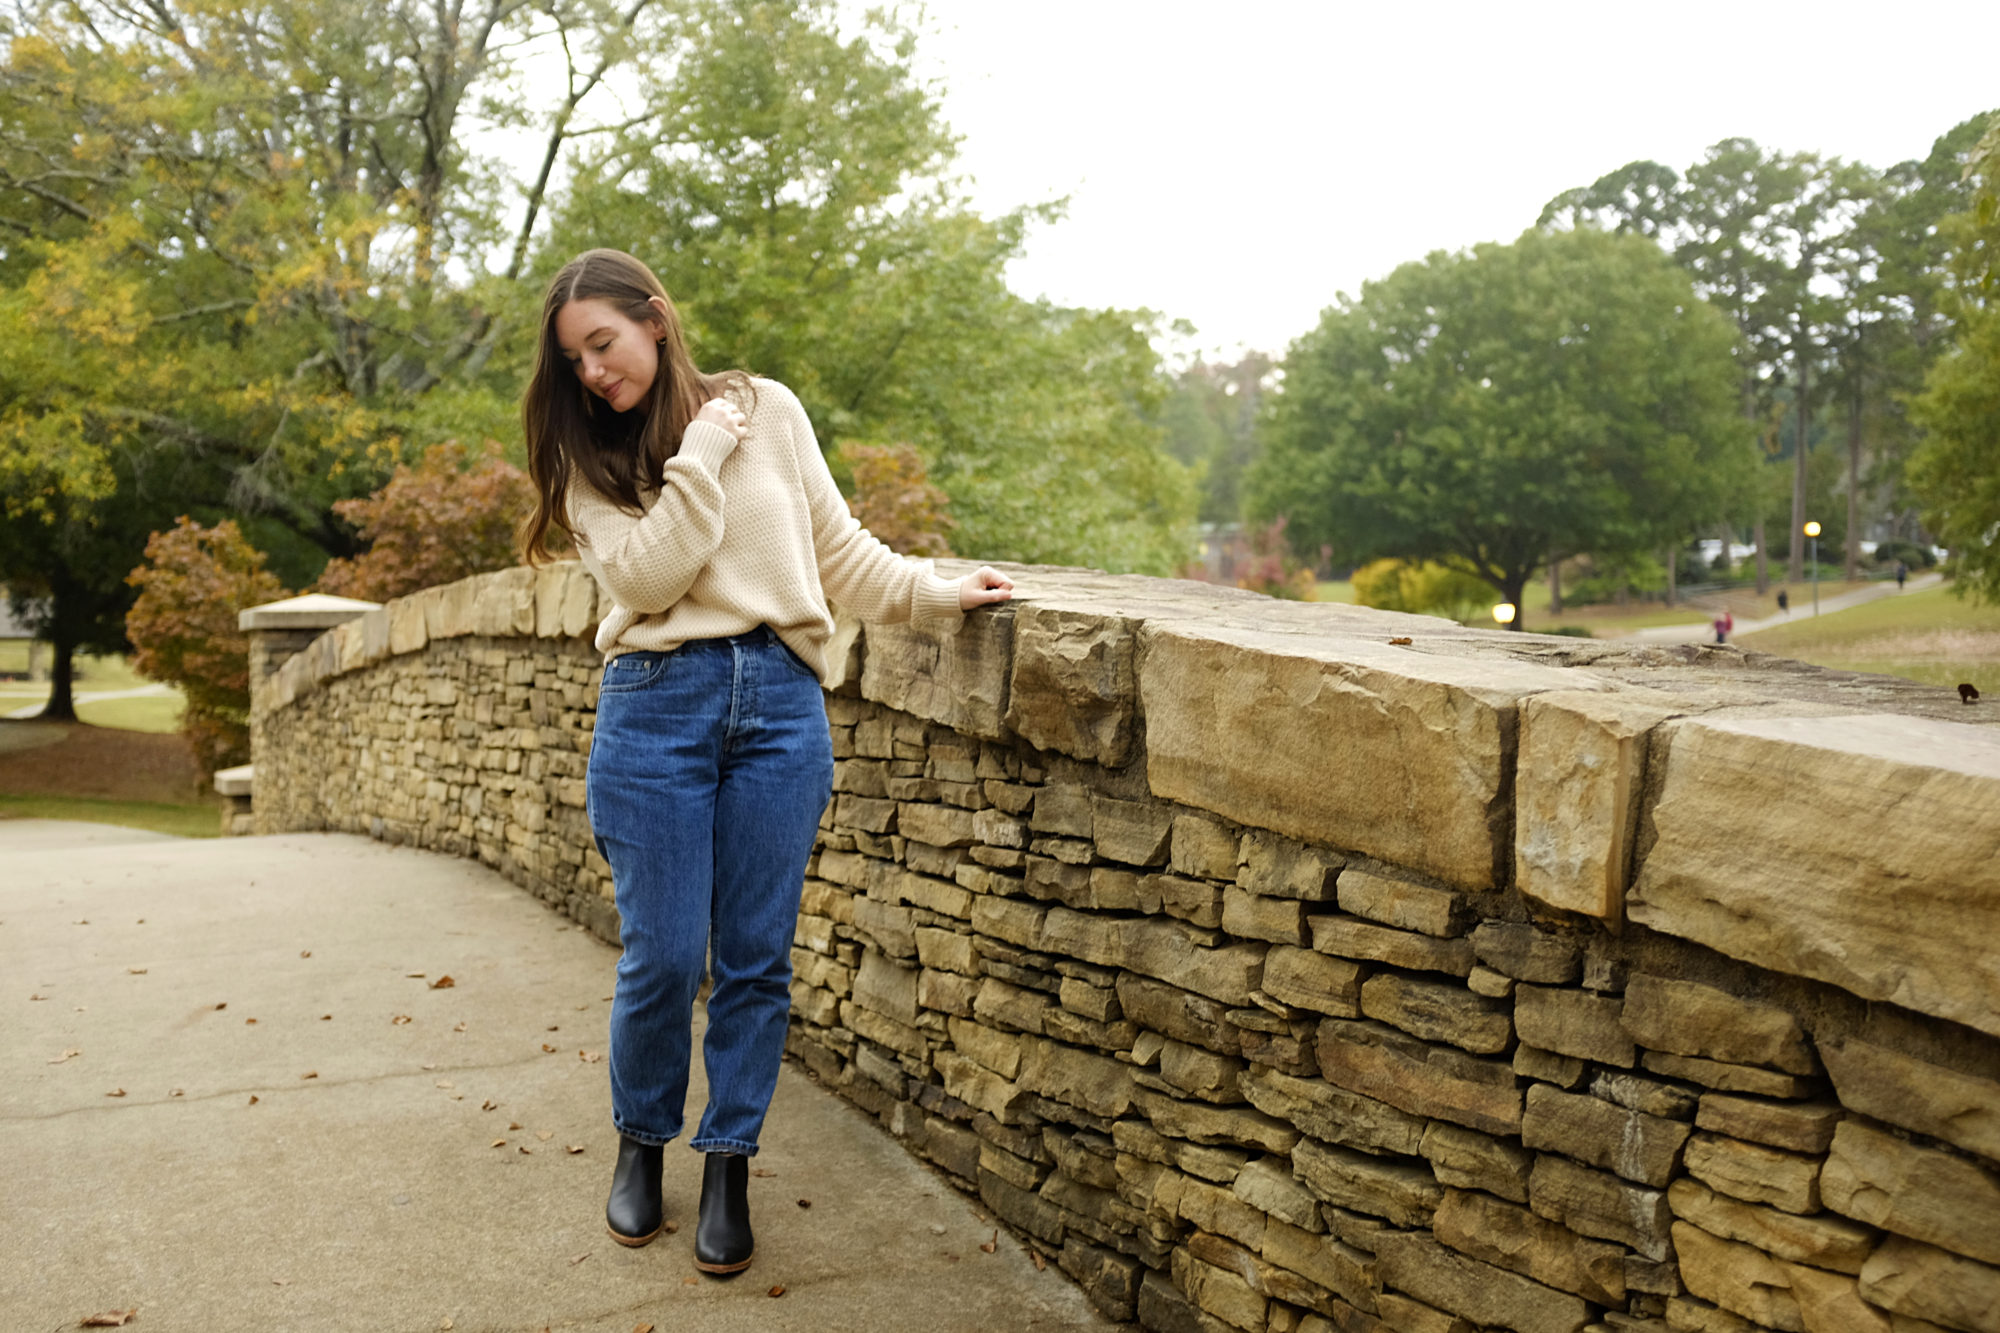 Alyssa wears the Honeycomb sweater from Pact with jeans and boots